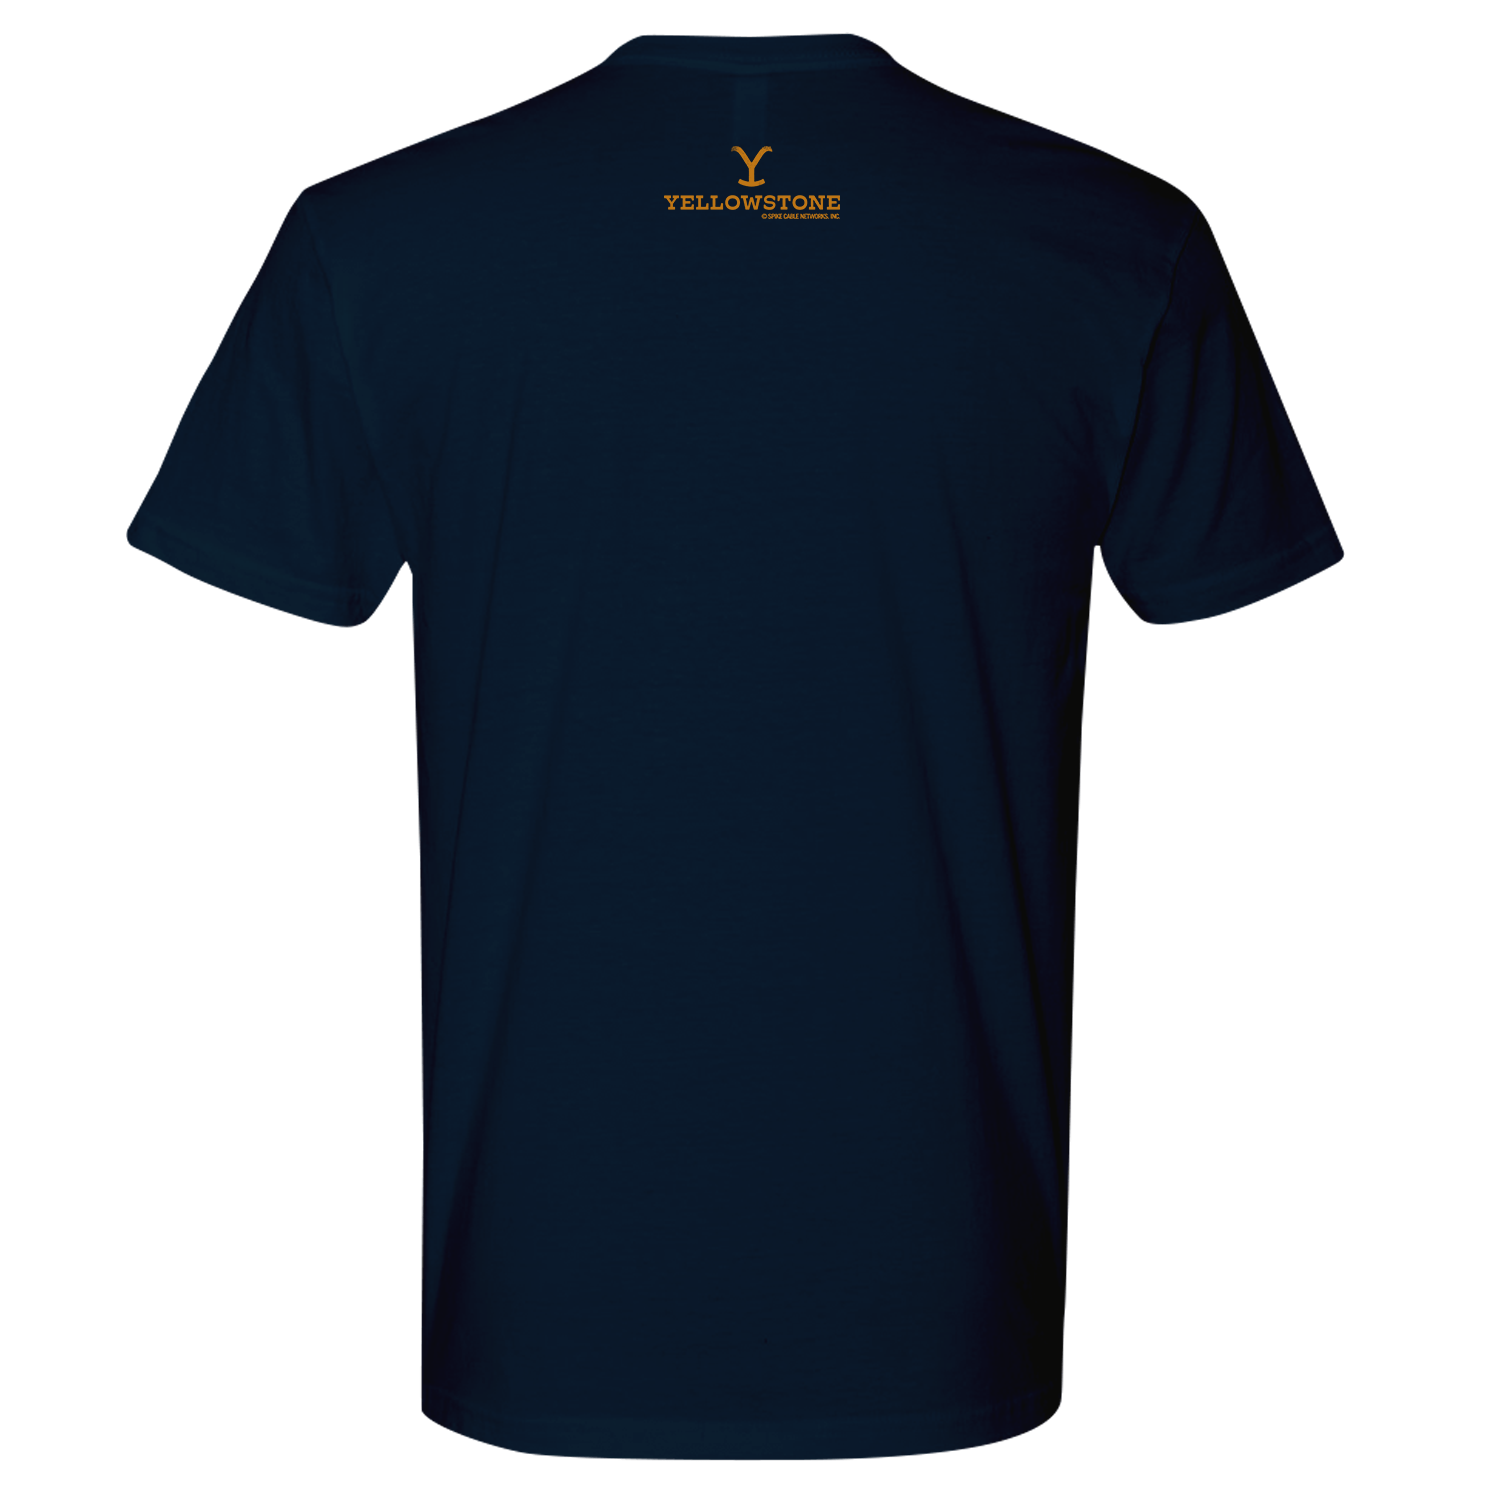 Yellowstone Keep Moving Unless You Are Rip Adult Short Sleeve T - Shirt - Paramount Shop